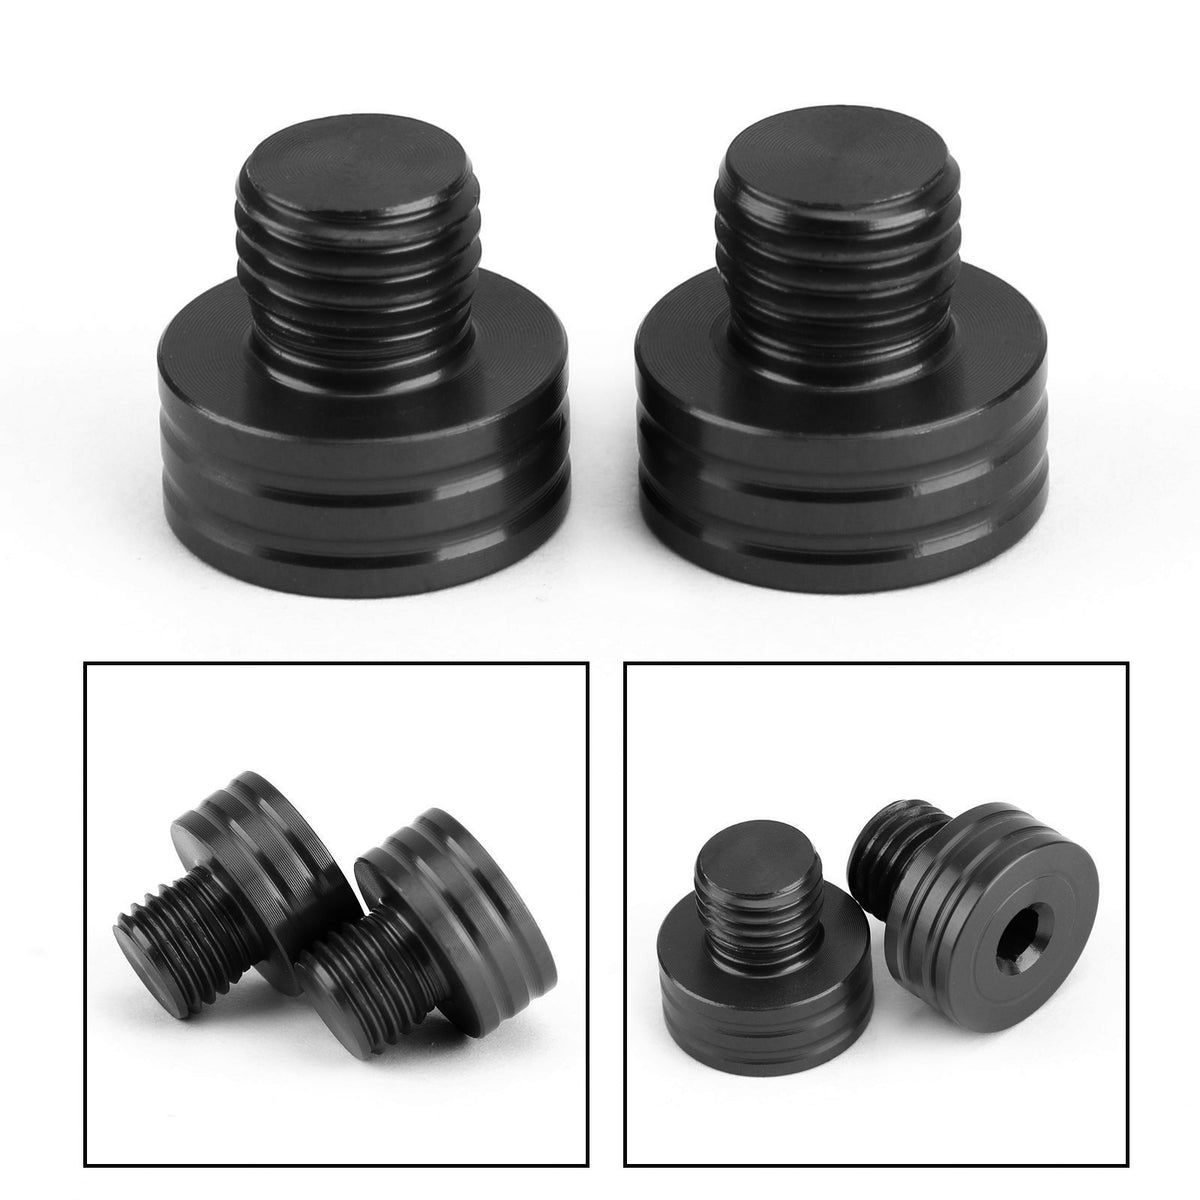 M10x1.25mm Mirror Hole Plugs Black for Yamaha MT-09 Tracer 700 NMAX150 TMAX530